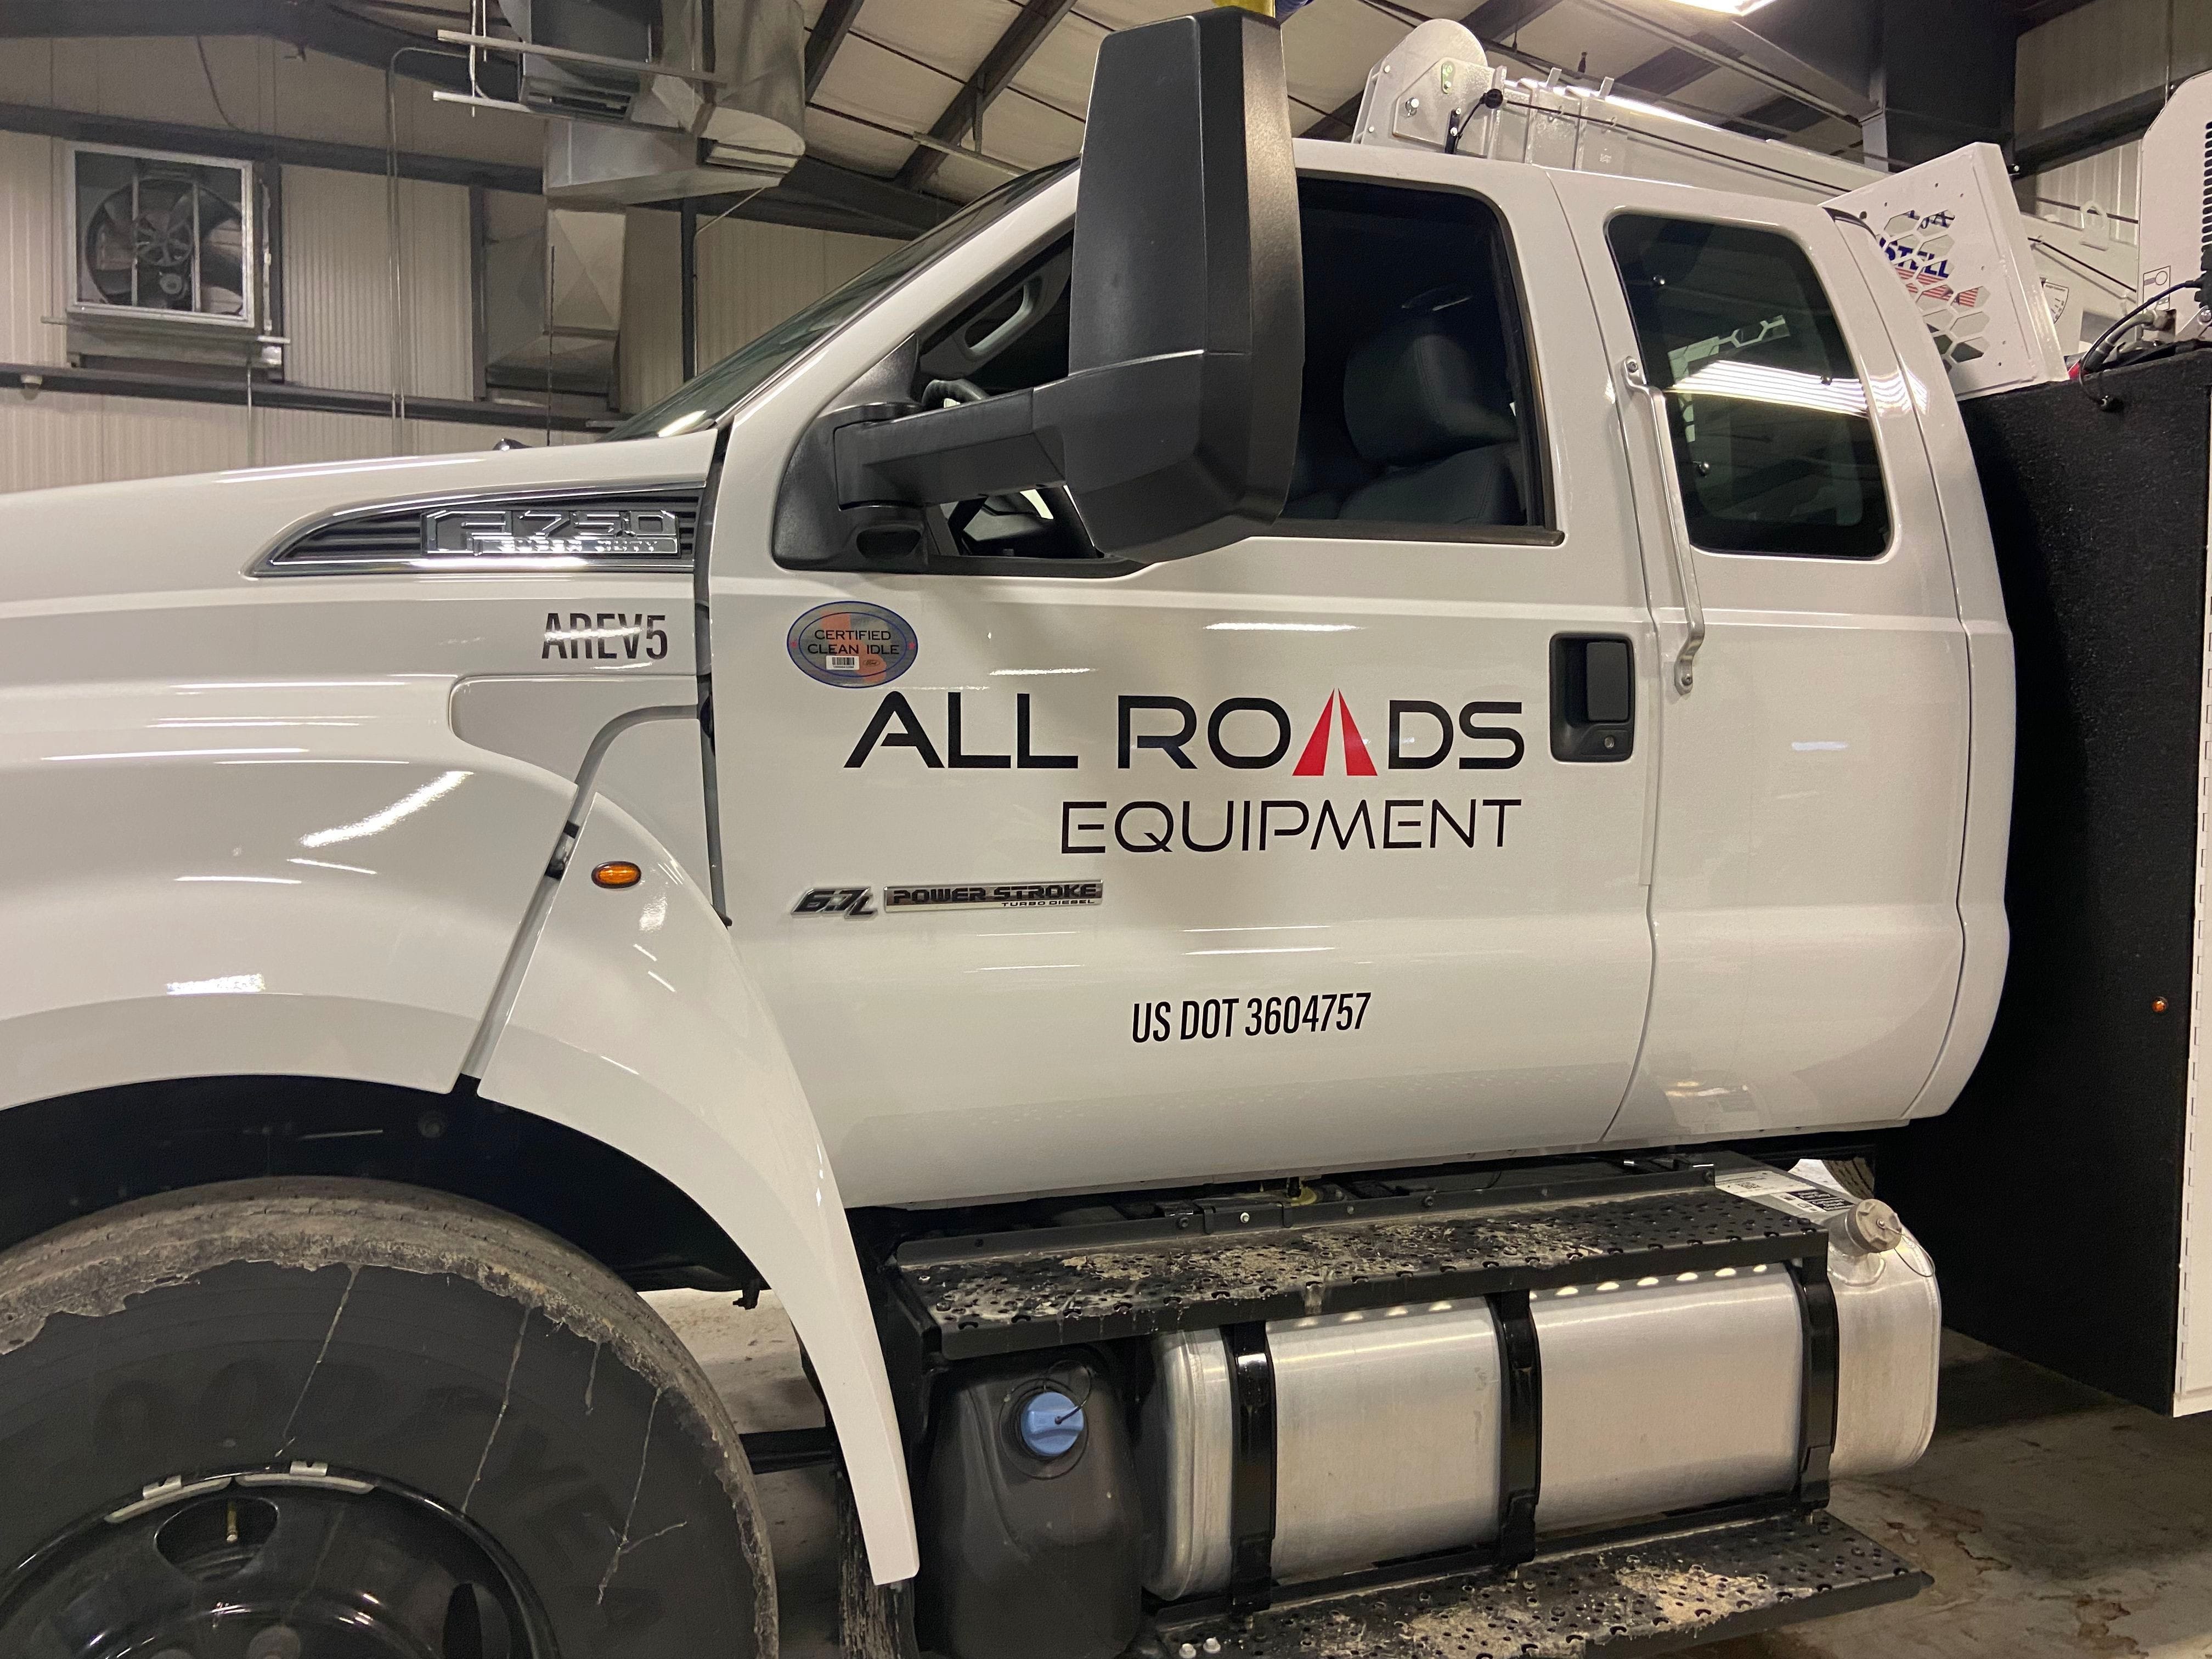 All Roads Equipment Decal on a Truck